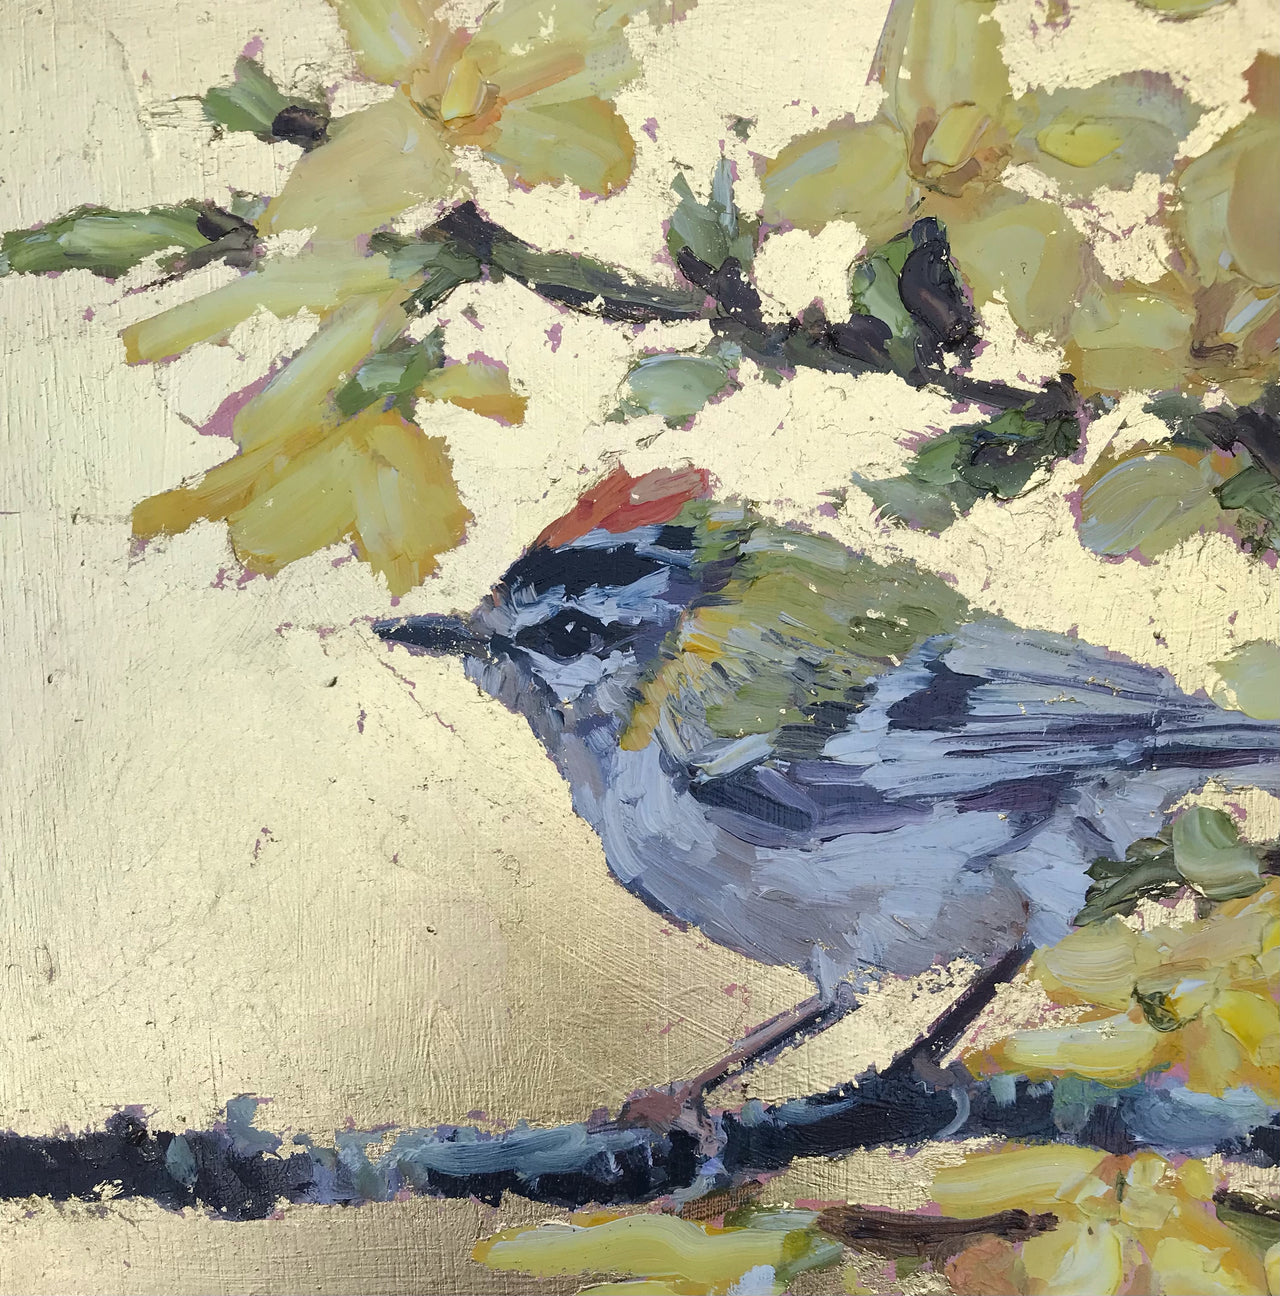 Square painting with gold lustre background, firecrest sitting on branch in foregound and yellow/cream blossom by artist Jill Hudson